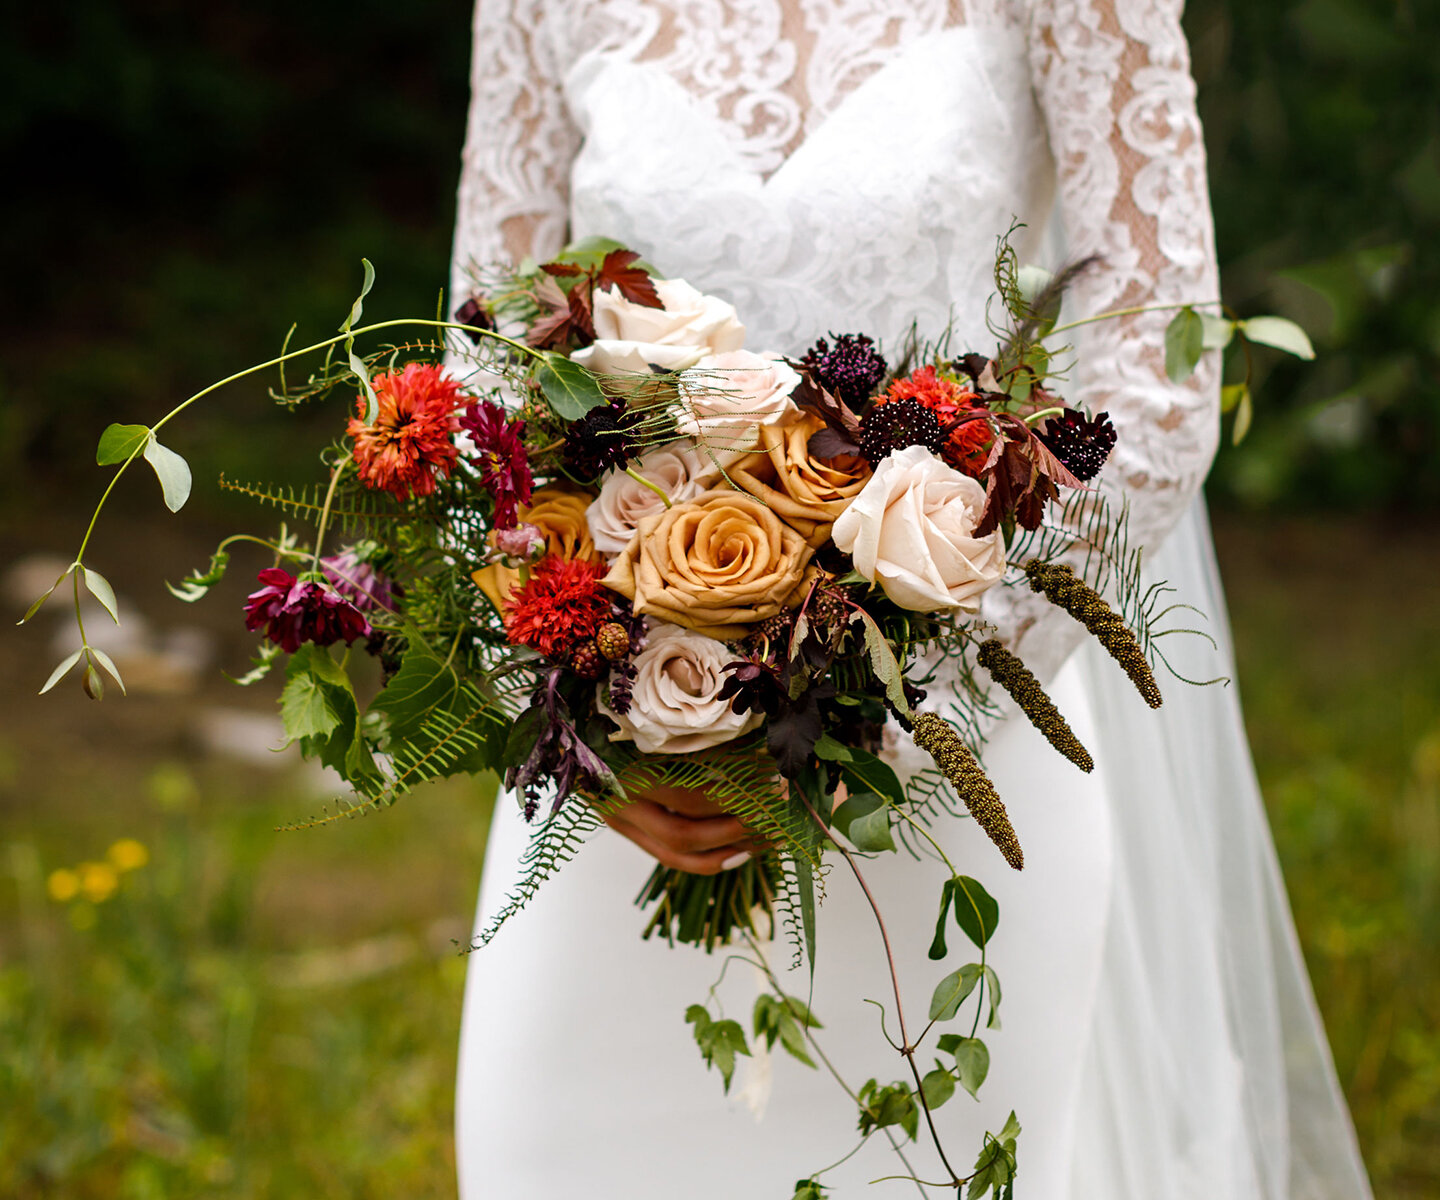 Bridal Bouquet Inspiration for Fall: 12 of the Prettiest Bouquets We've Seen This Autumn in Alberta and the Rockies